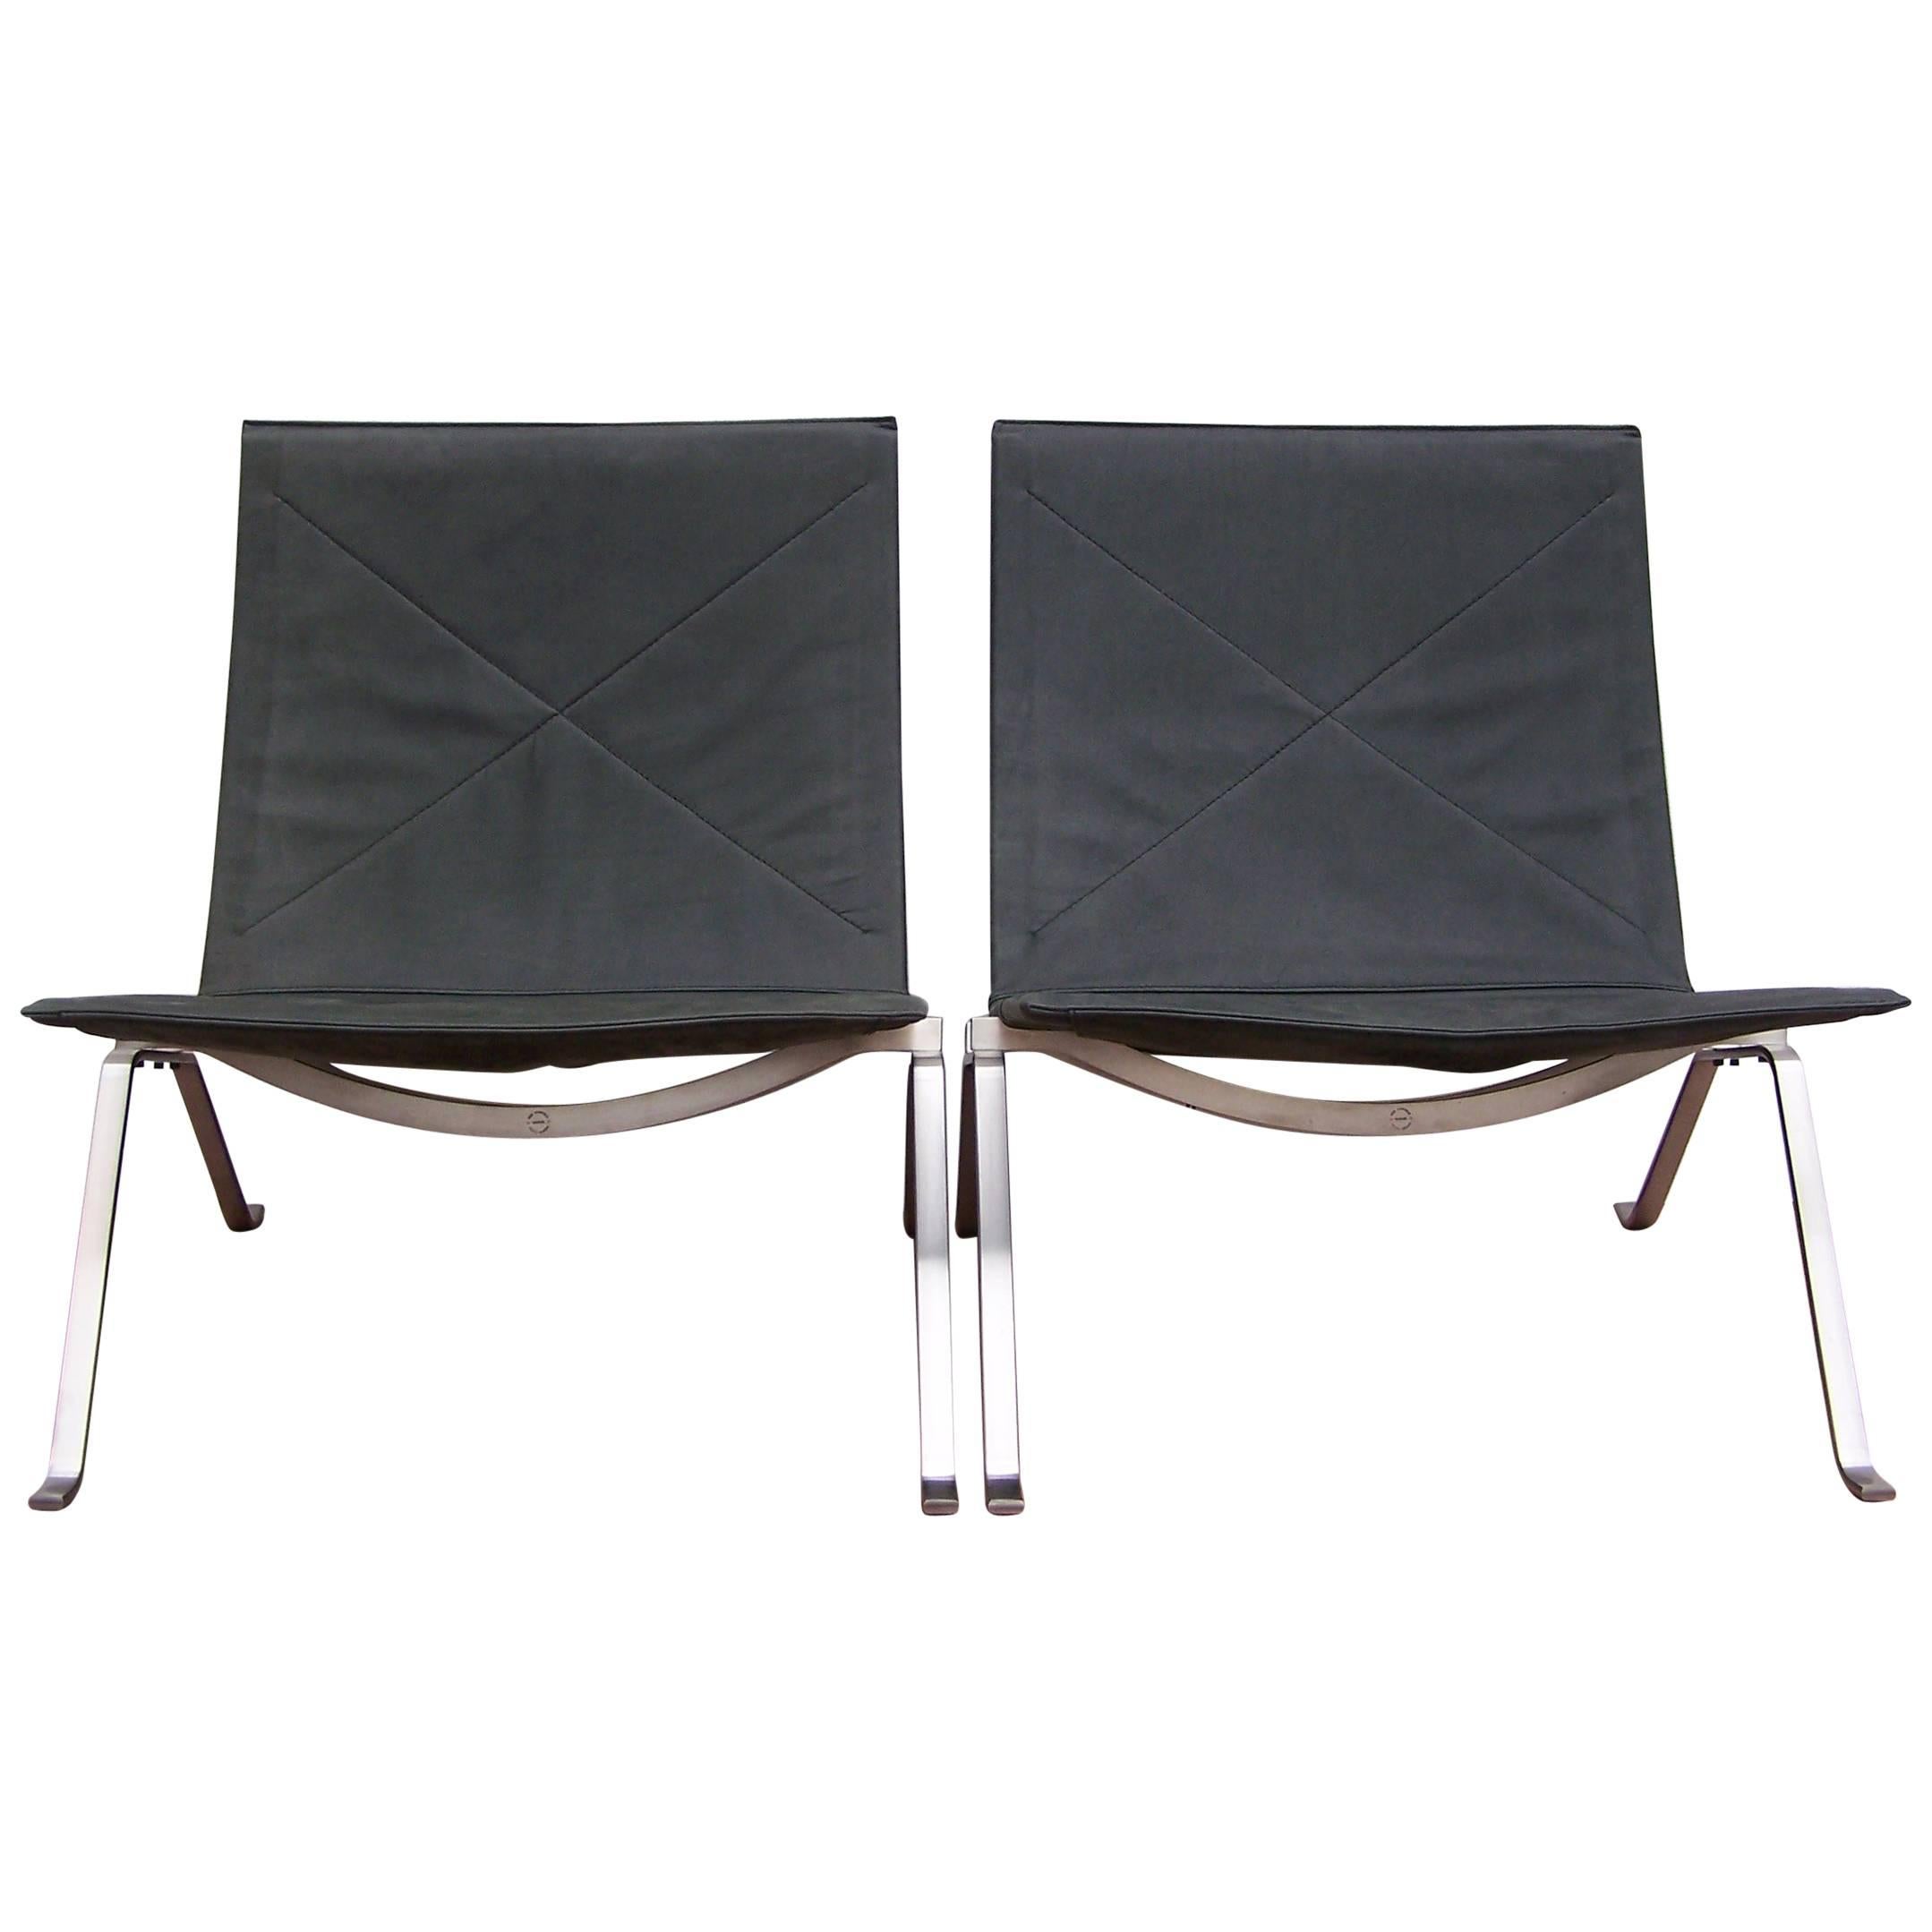 Poul Kjaerholm PK22 Lounge Chairs Exclusive Edition, Set of Two For Sale